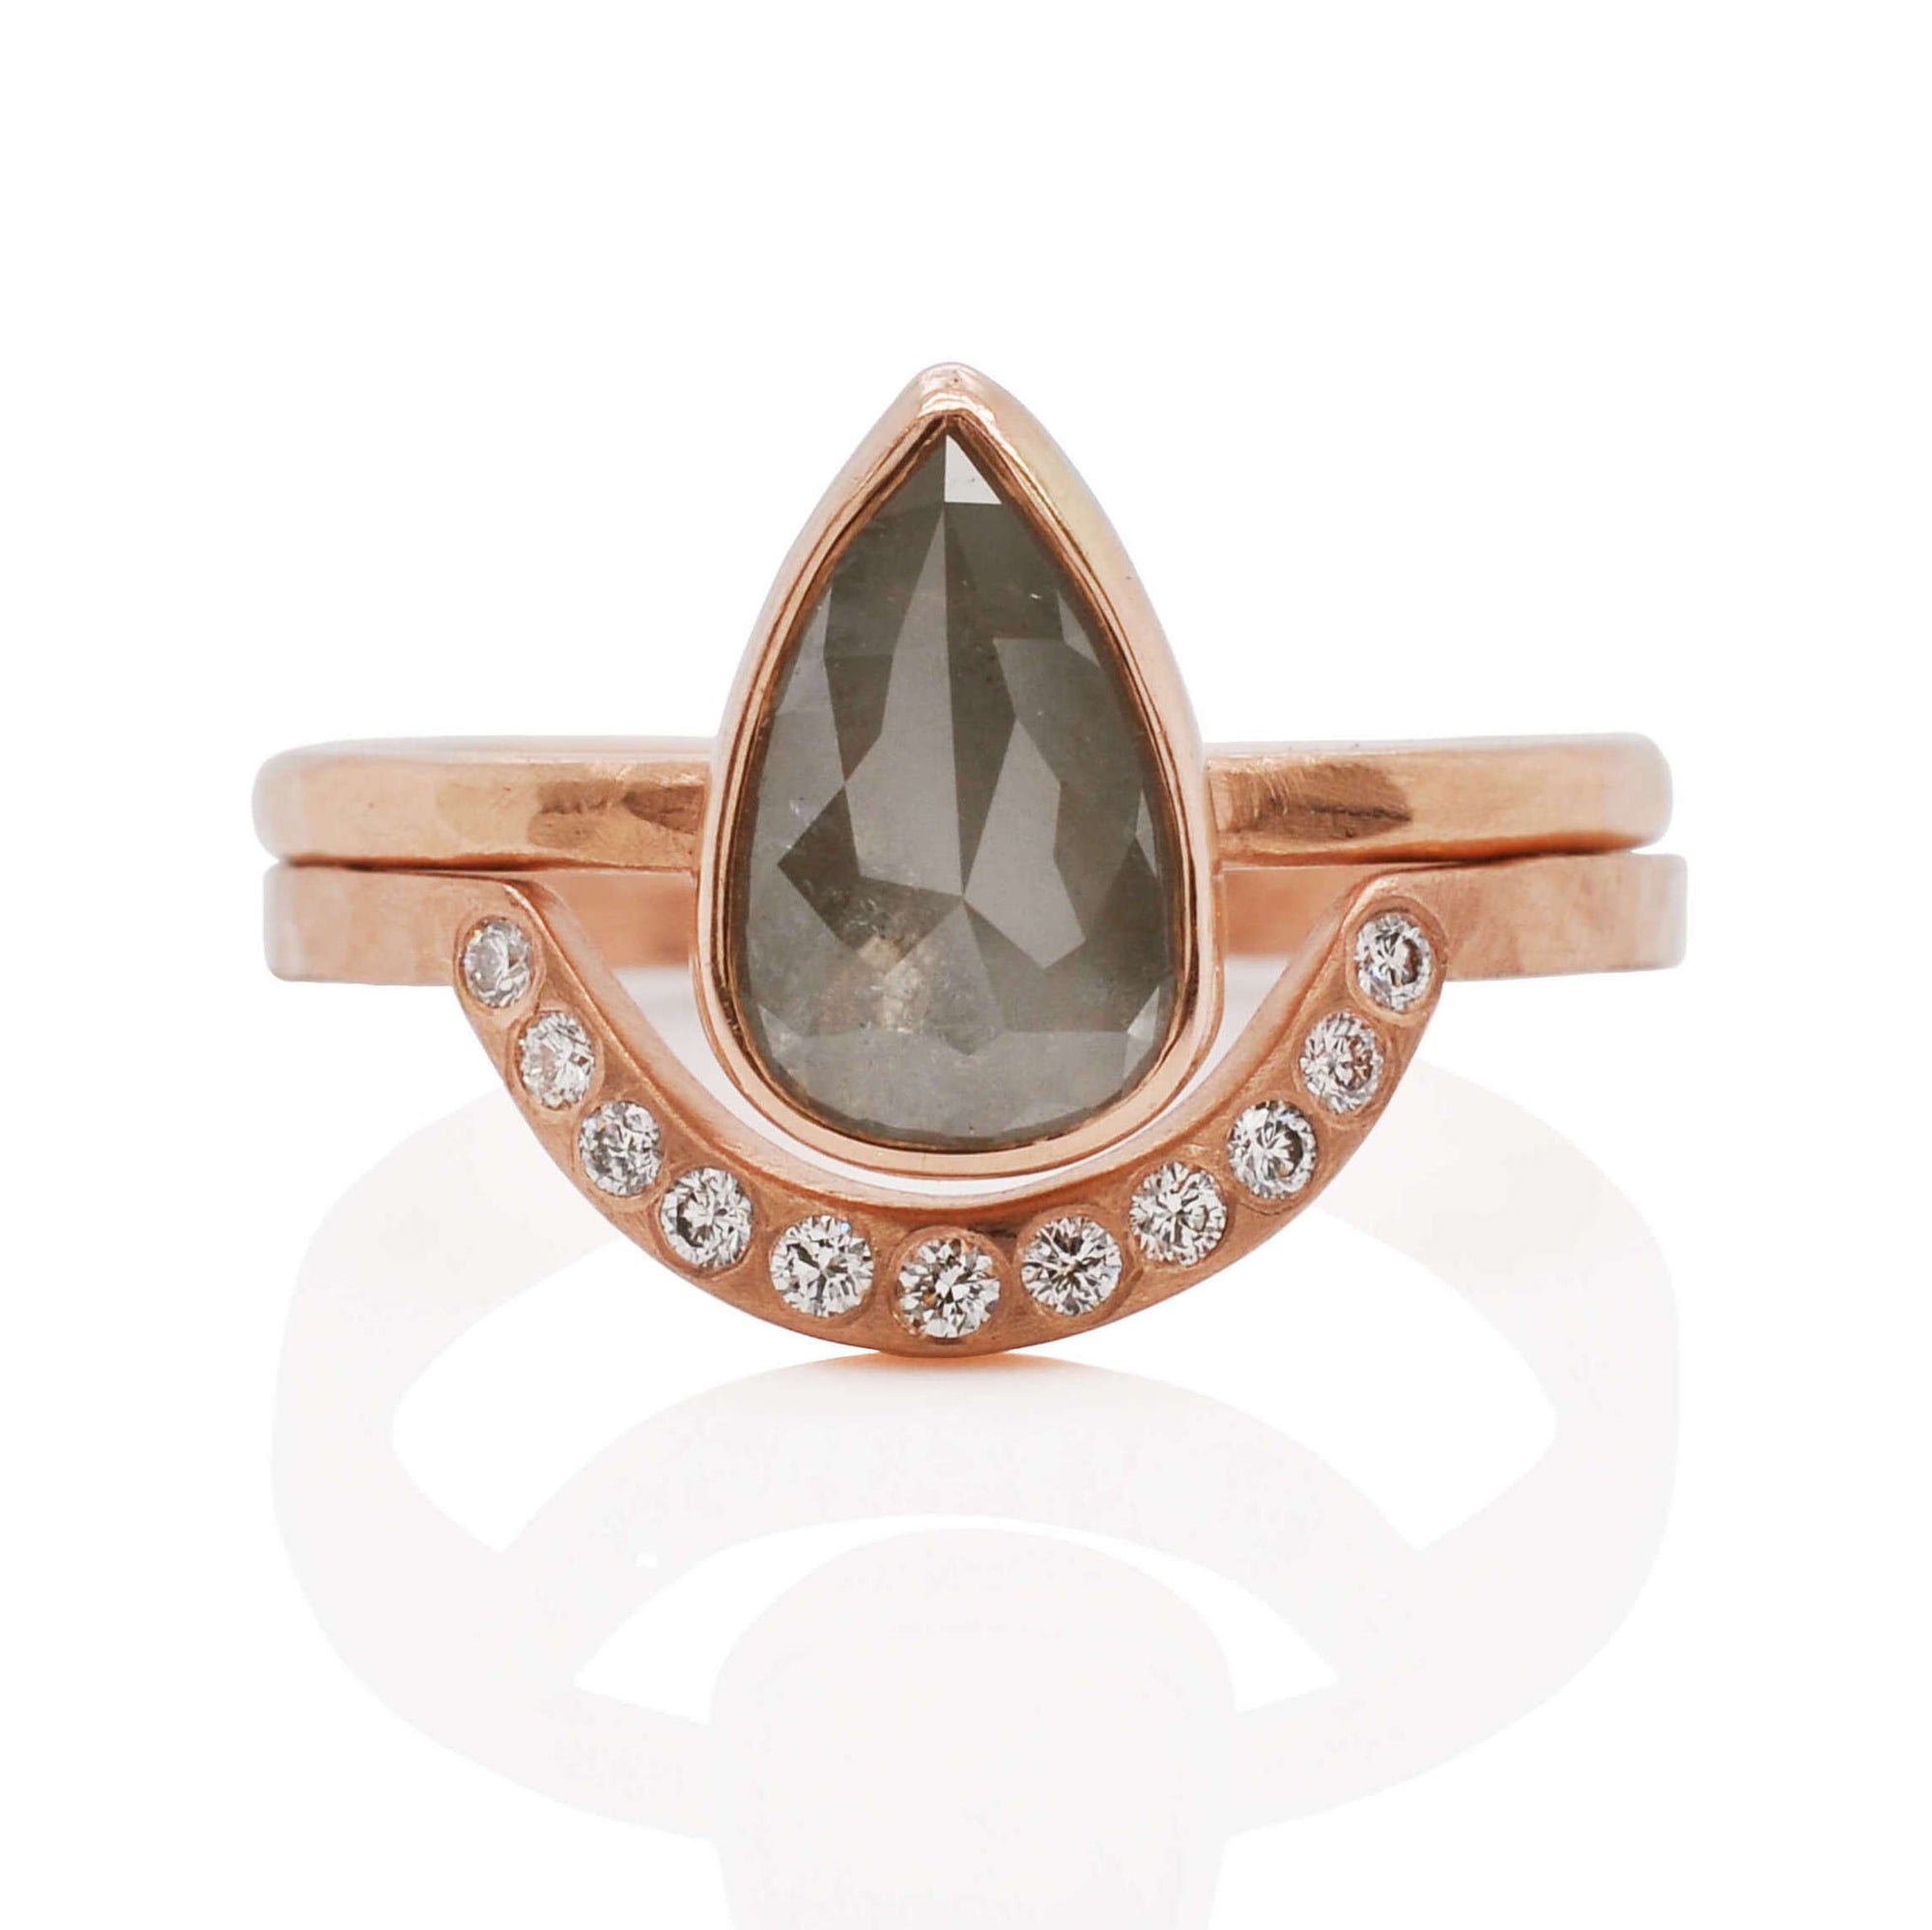 Modern engagement ring wedding set. the solitaire ring is teardrop shaped, rosecut, salt and pepper diamond, bezel set in rose gold on a hammered band. Stacked with a contour band with inset white diamonds